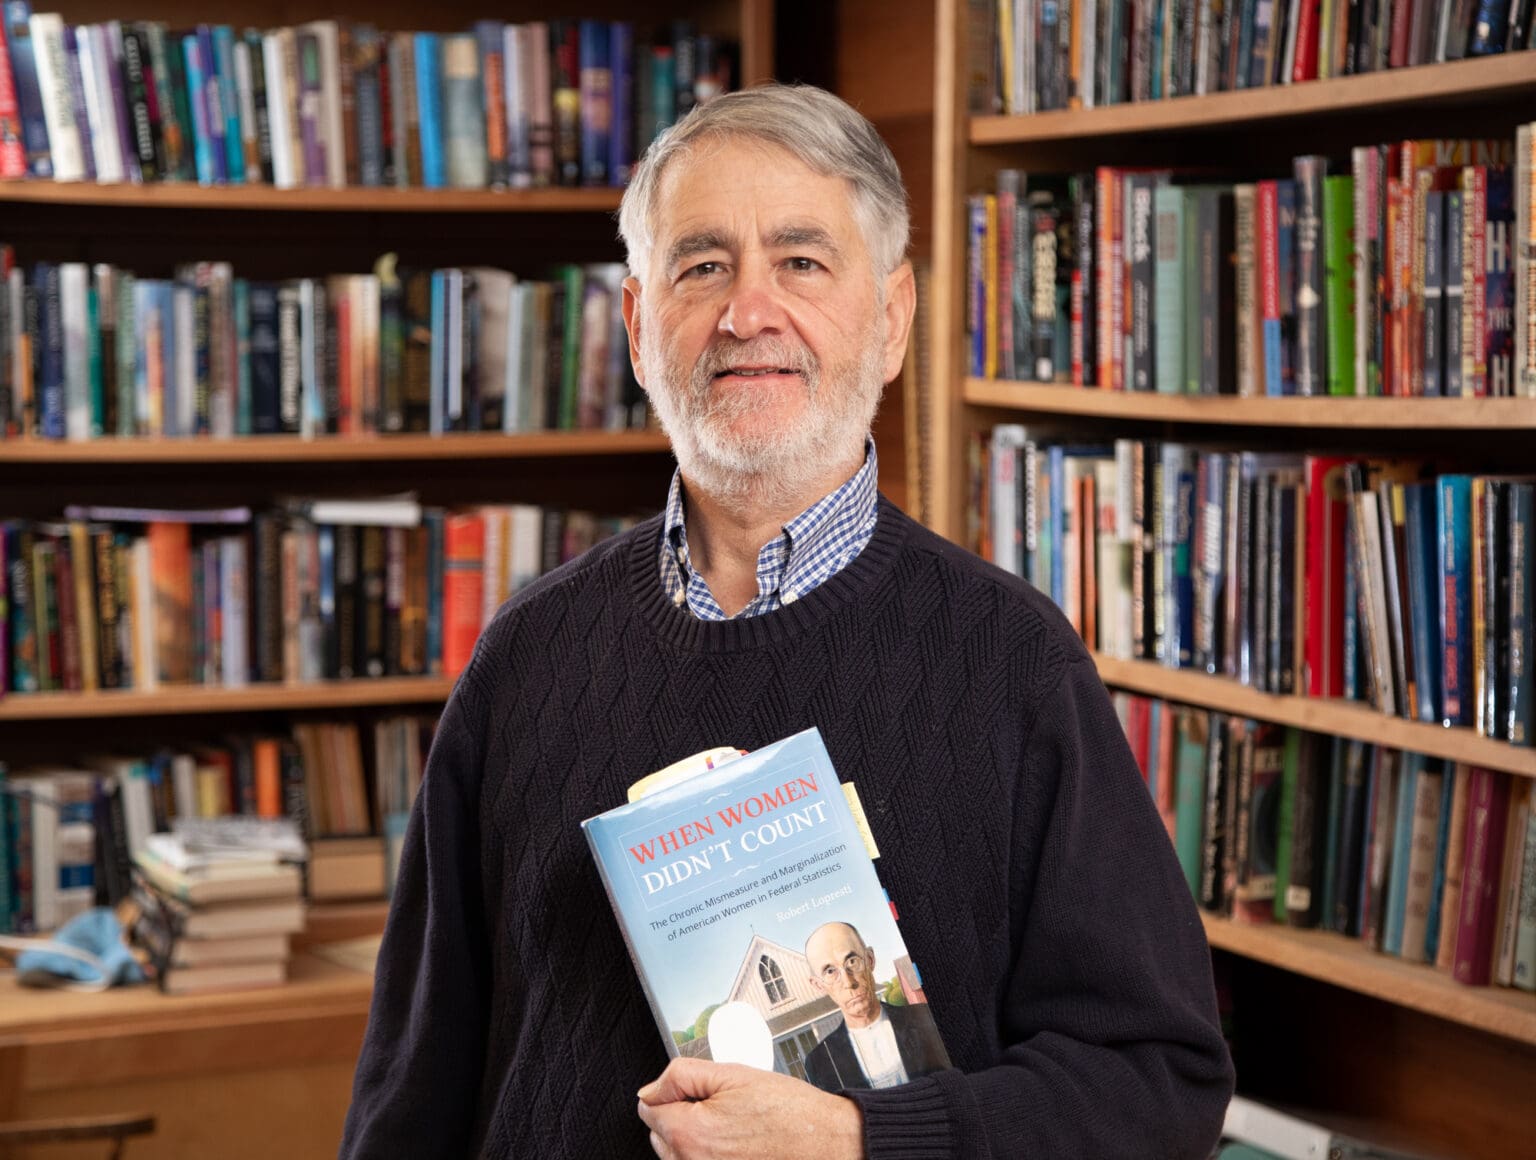 Author and retired librarian Rob Lopresti is surrounded by books in his Bellingham home on Friday